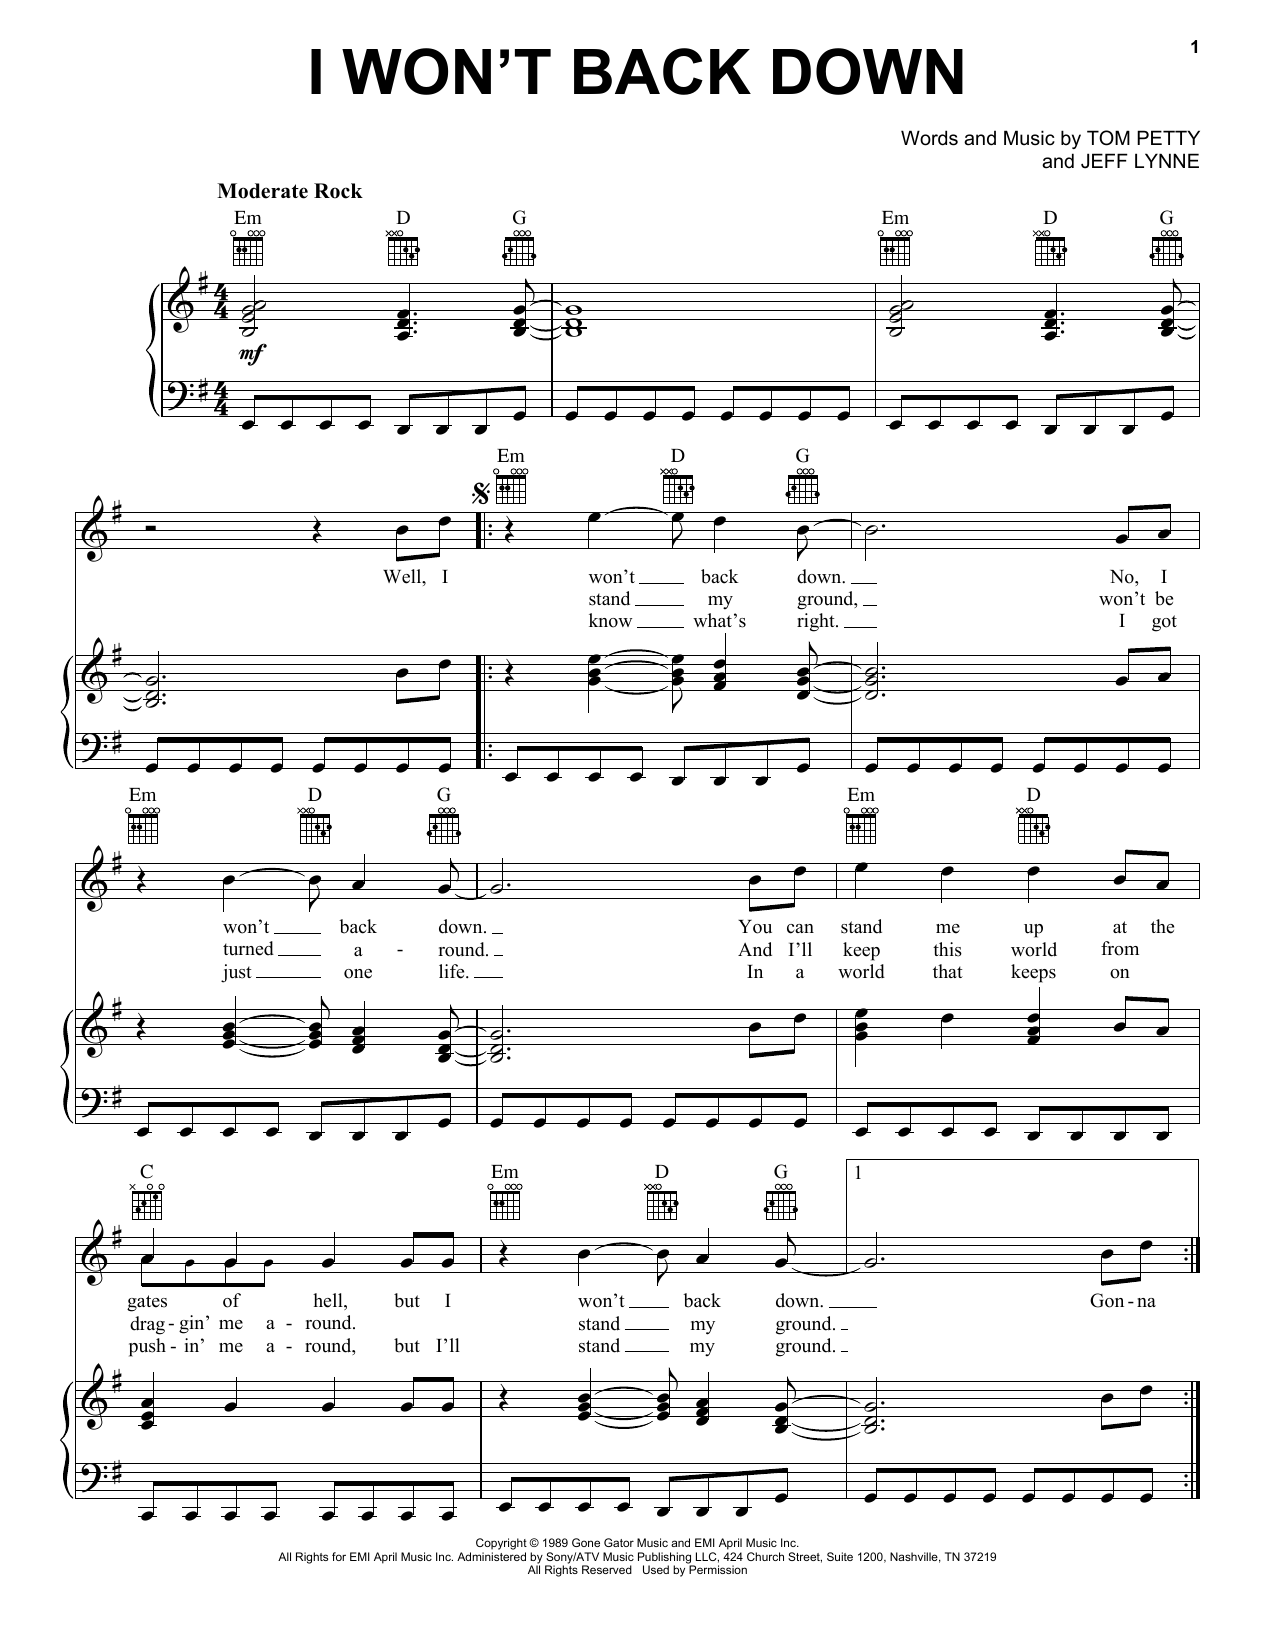 Tom Petty I Won't Back Down sheet music notes and chords. Download Printable PDF.